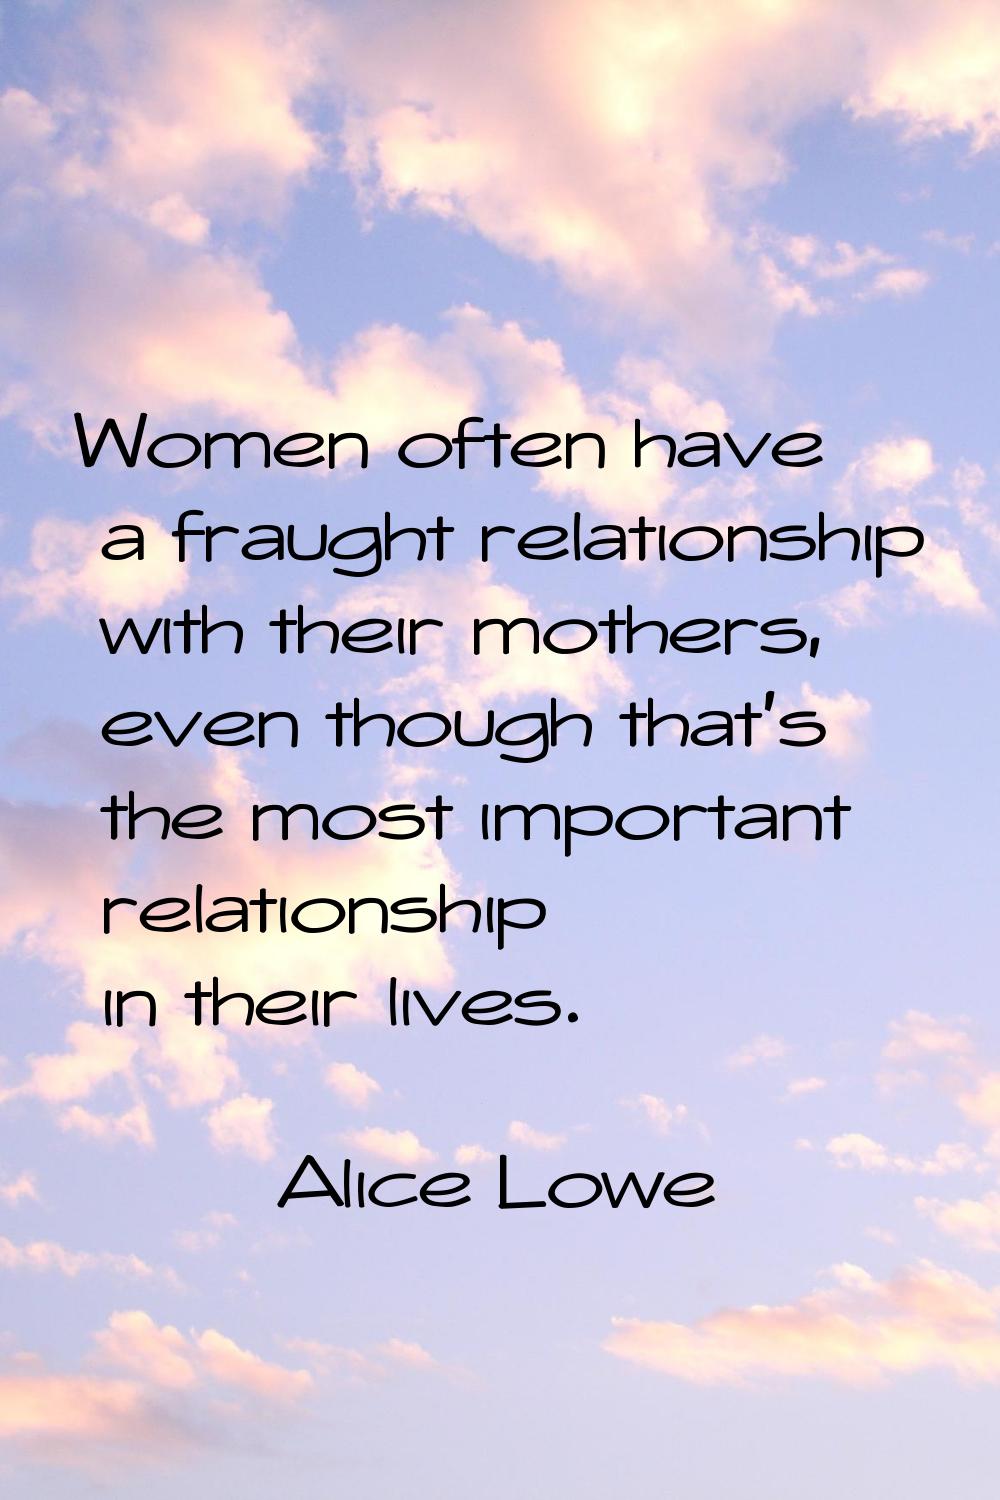 Women often have a fraught relationship with their mothers, even though that's the most important r